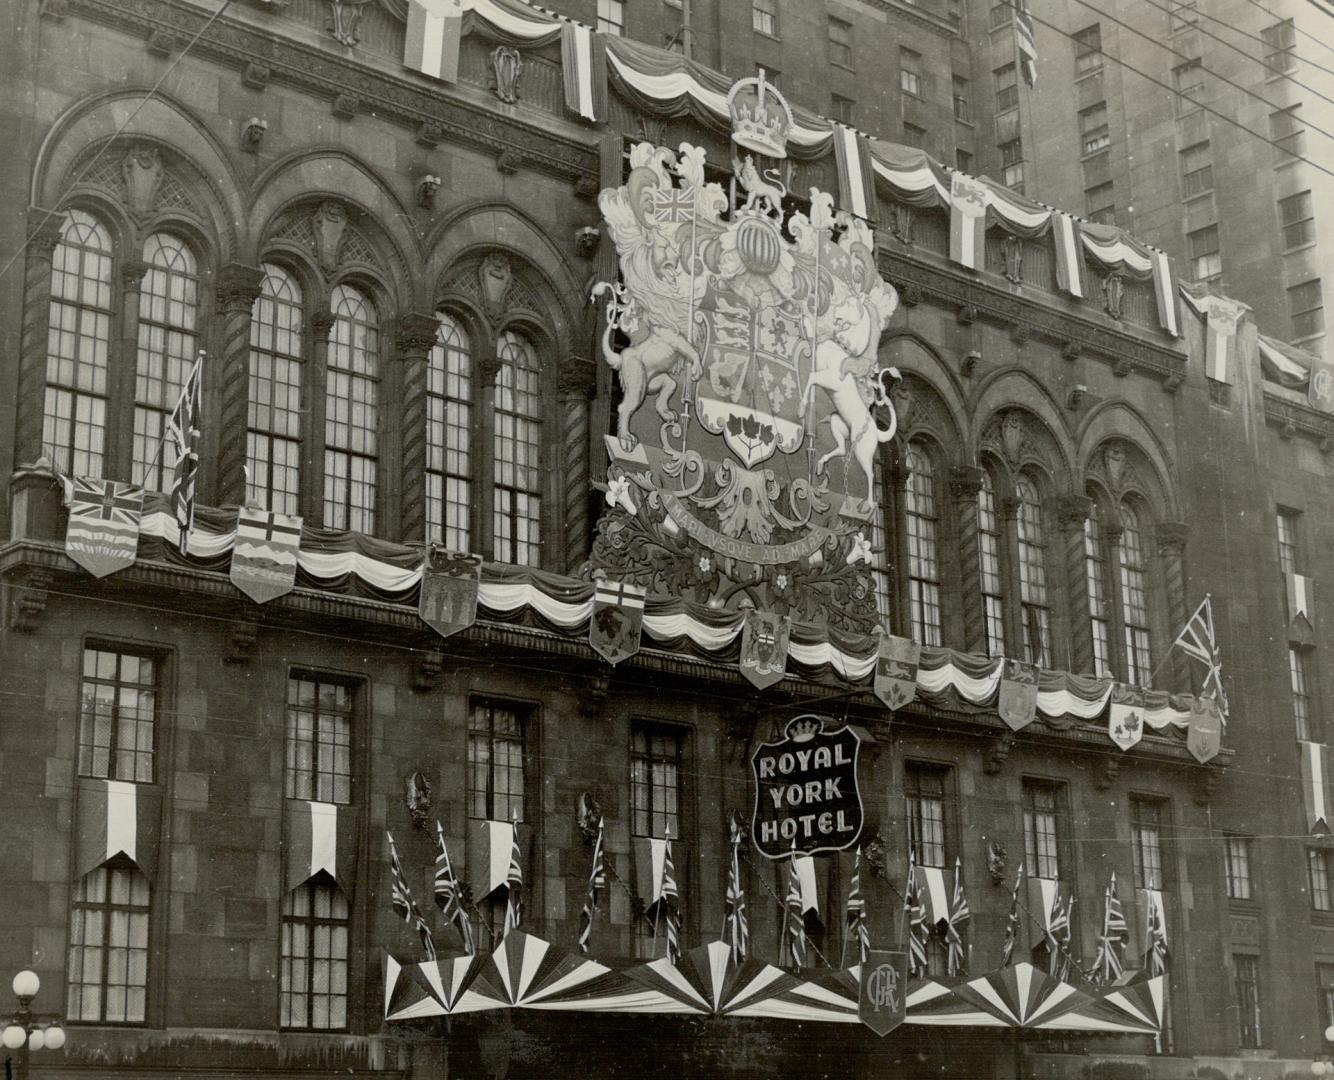 The royal york hotel, front st